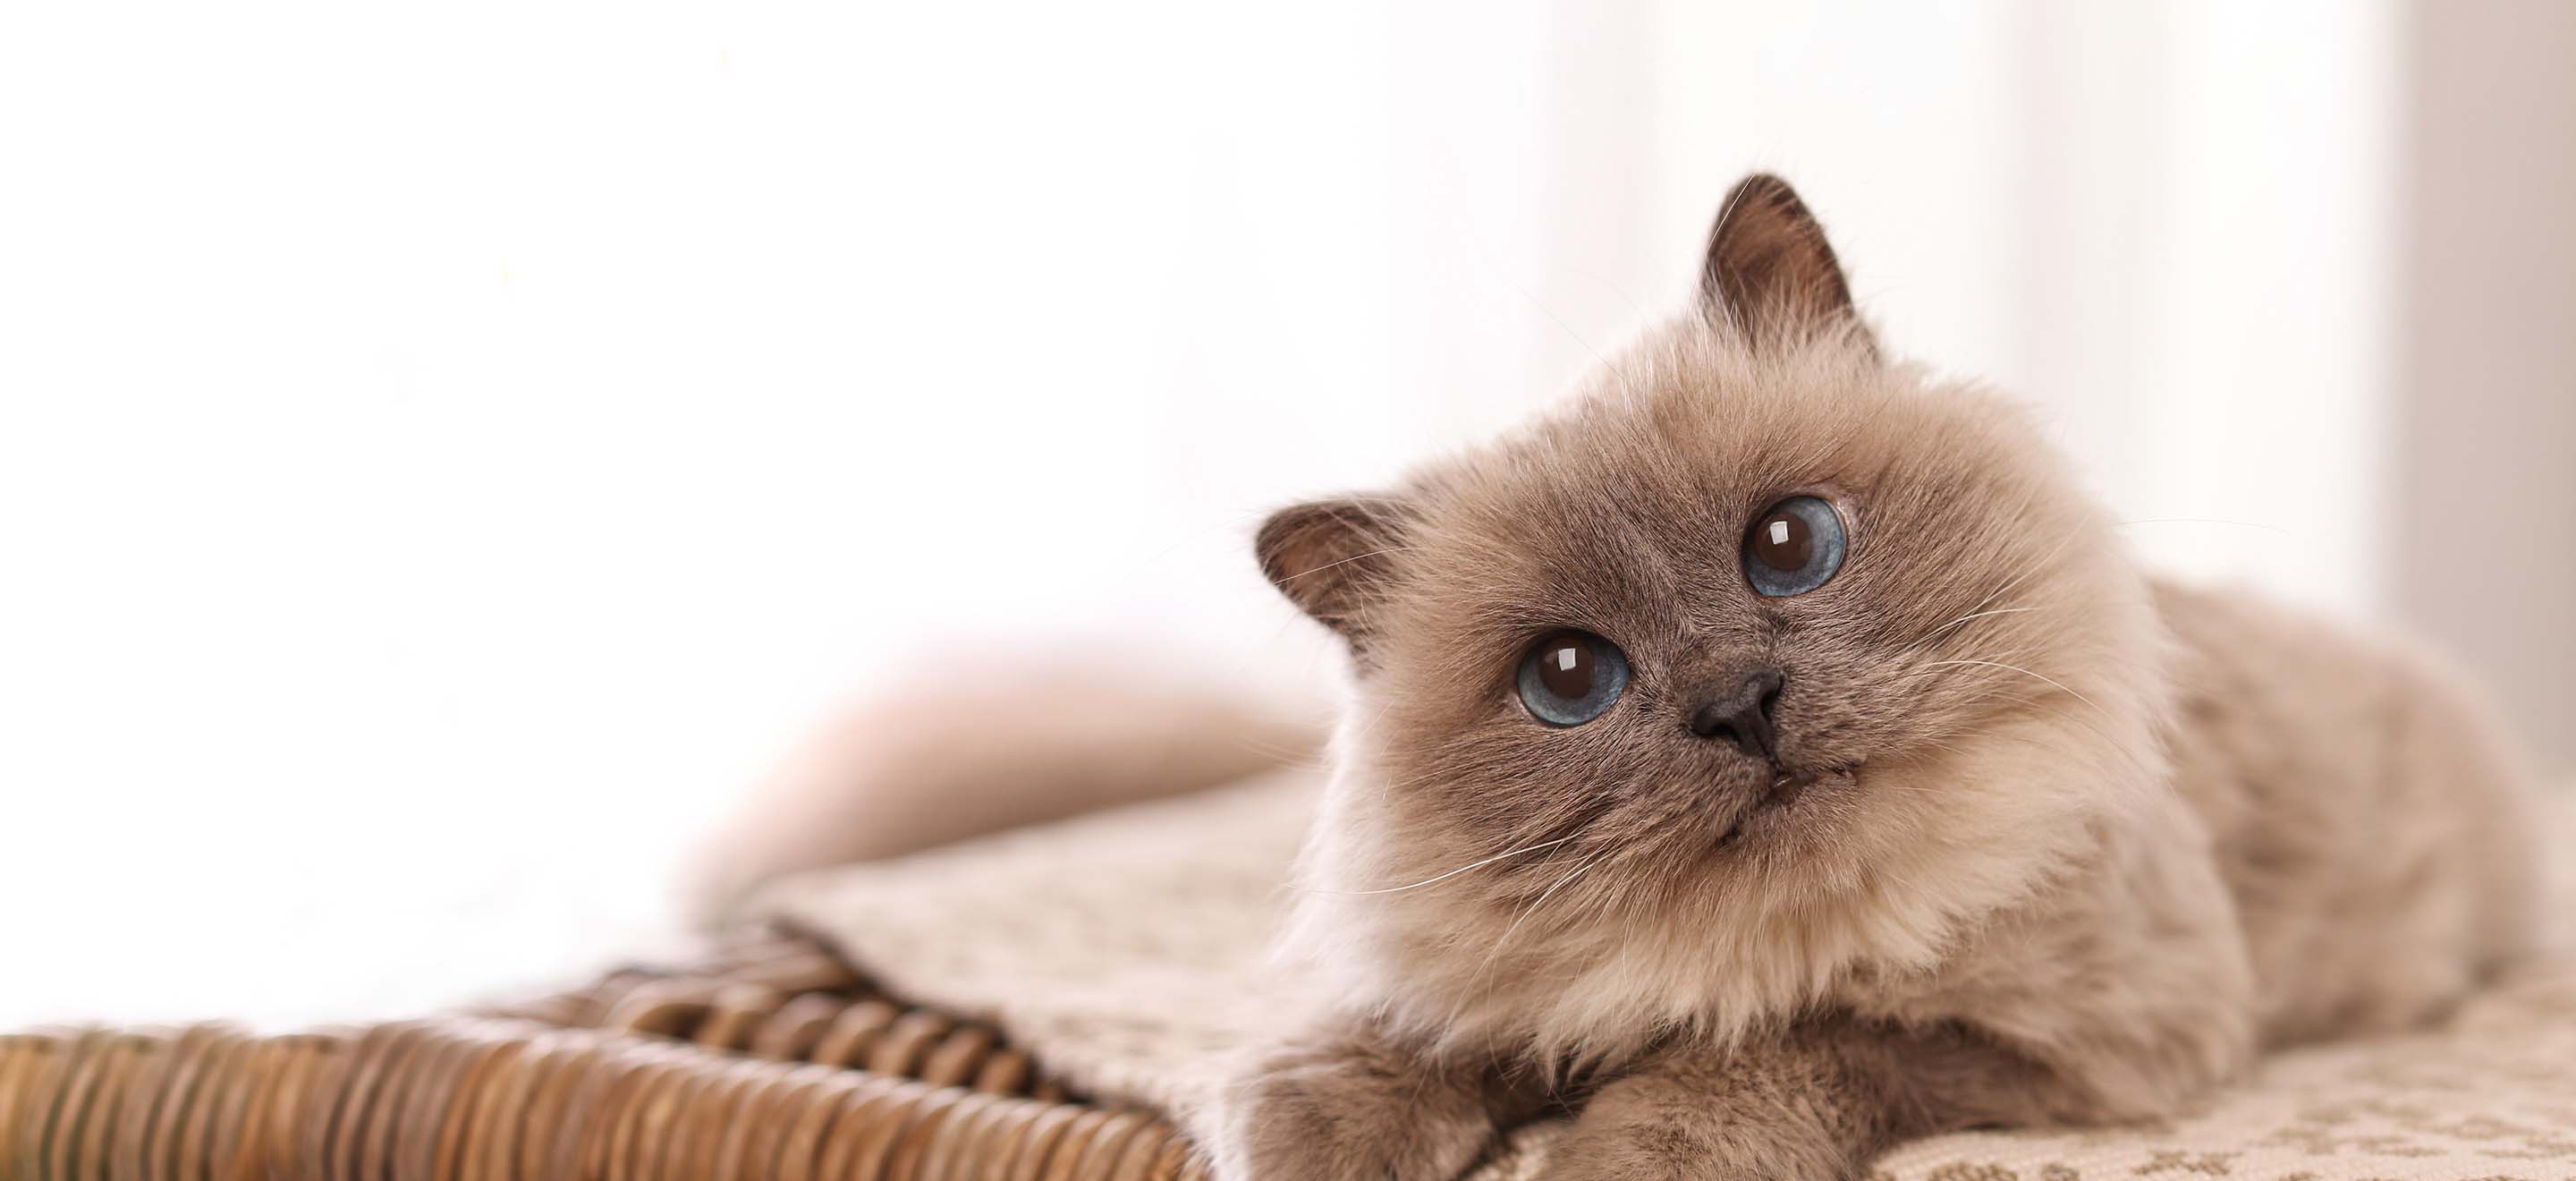 Birman cat with tilted head  looking at camera laying on a wool blanket image